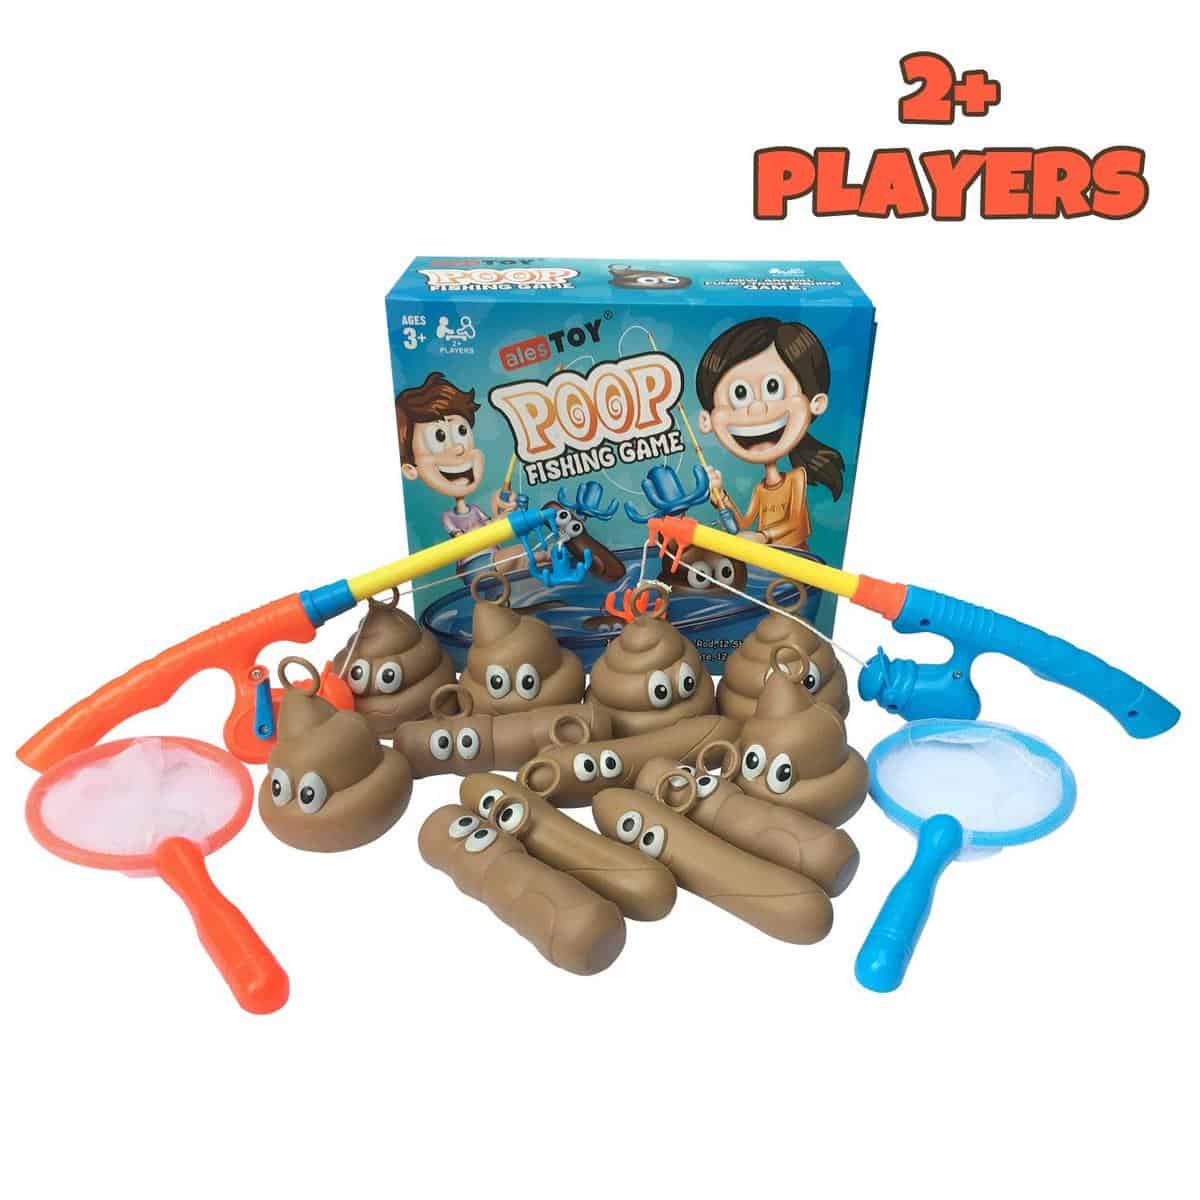 10 Best Poop Toys & Games For Kids » Read Now!